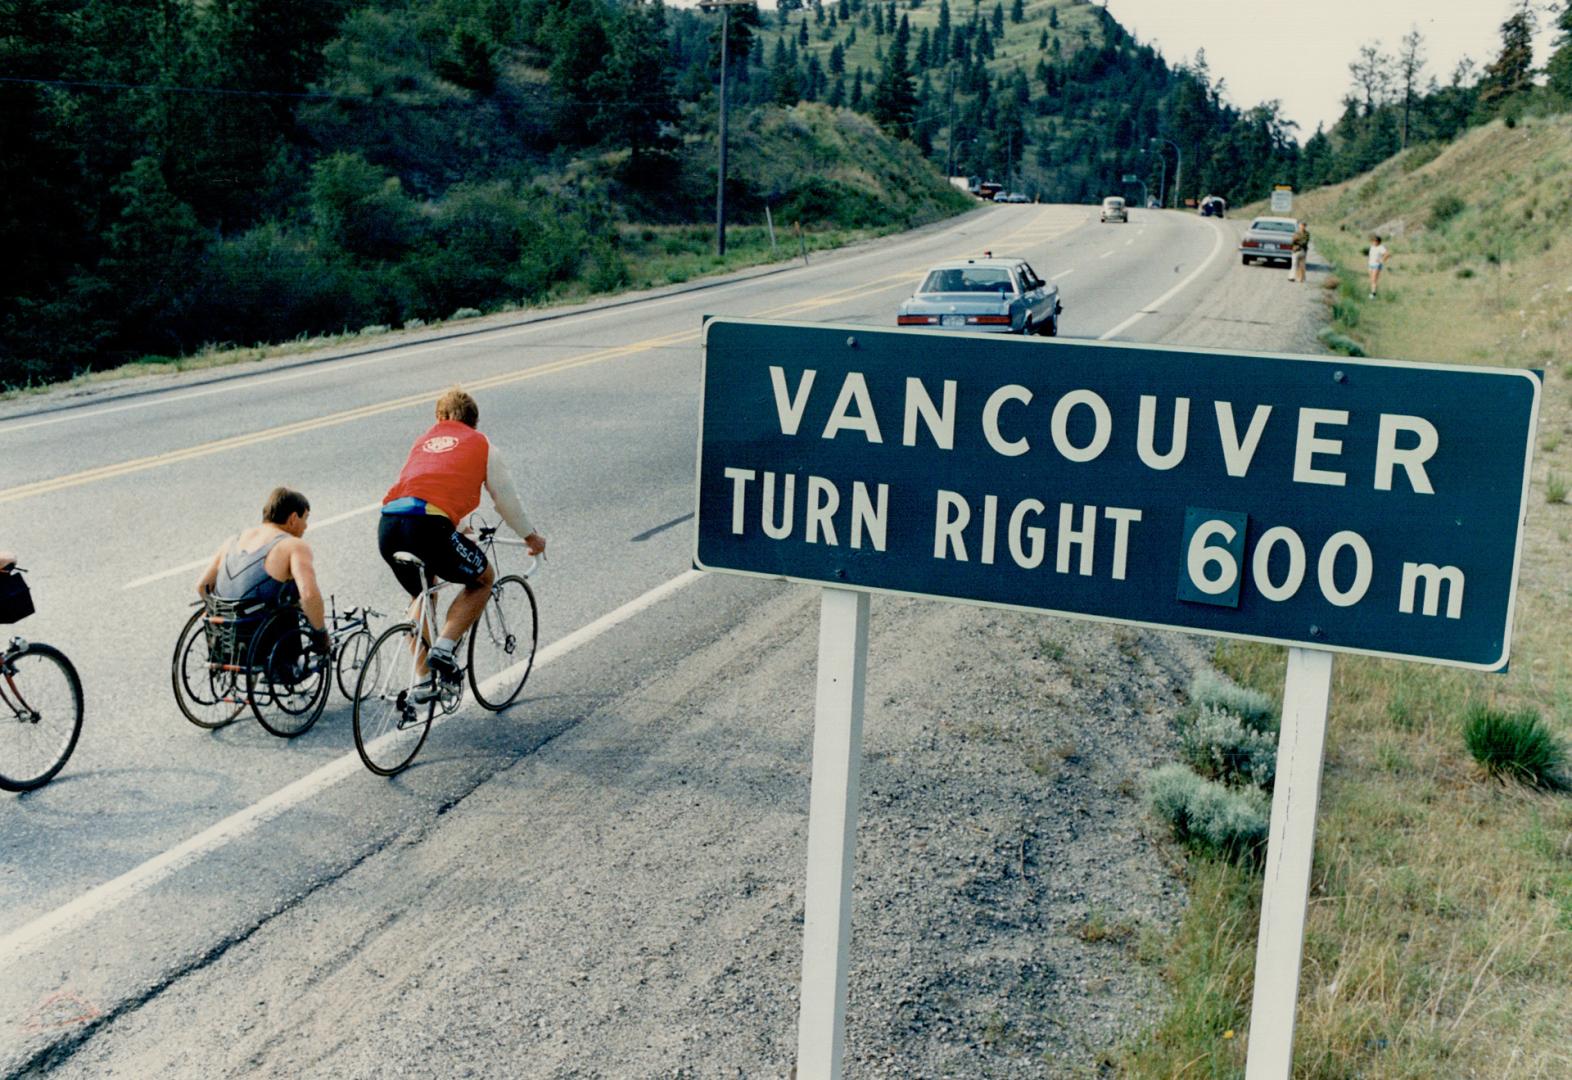 The turnoff for Vancouver, the last stop, coming up